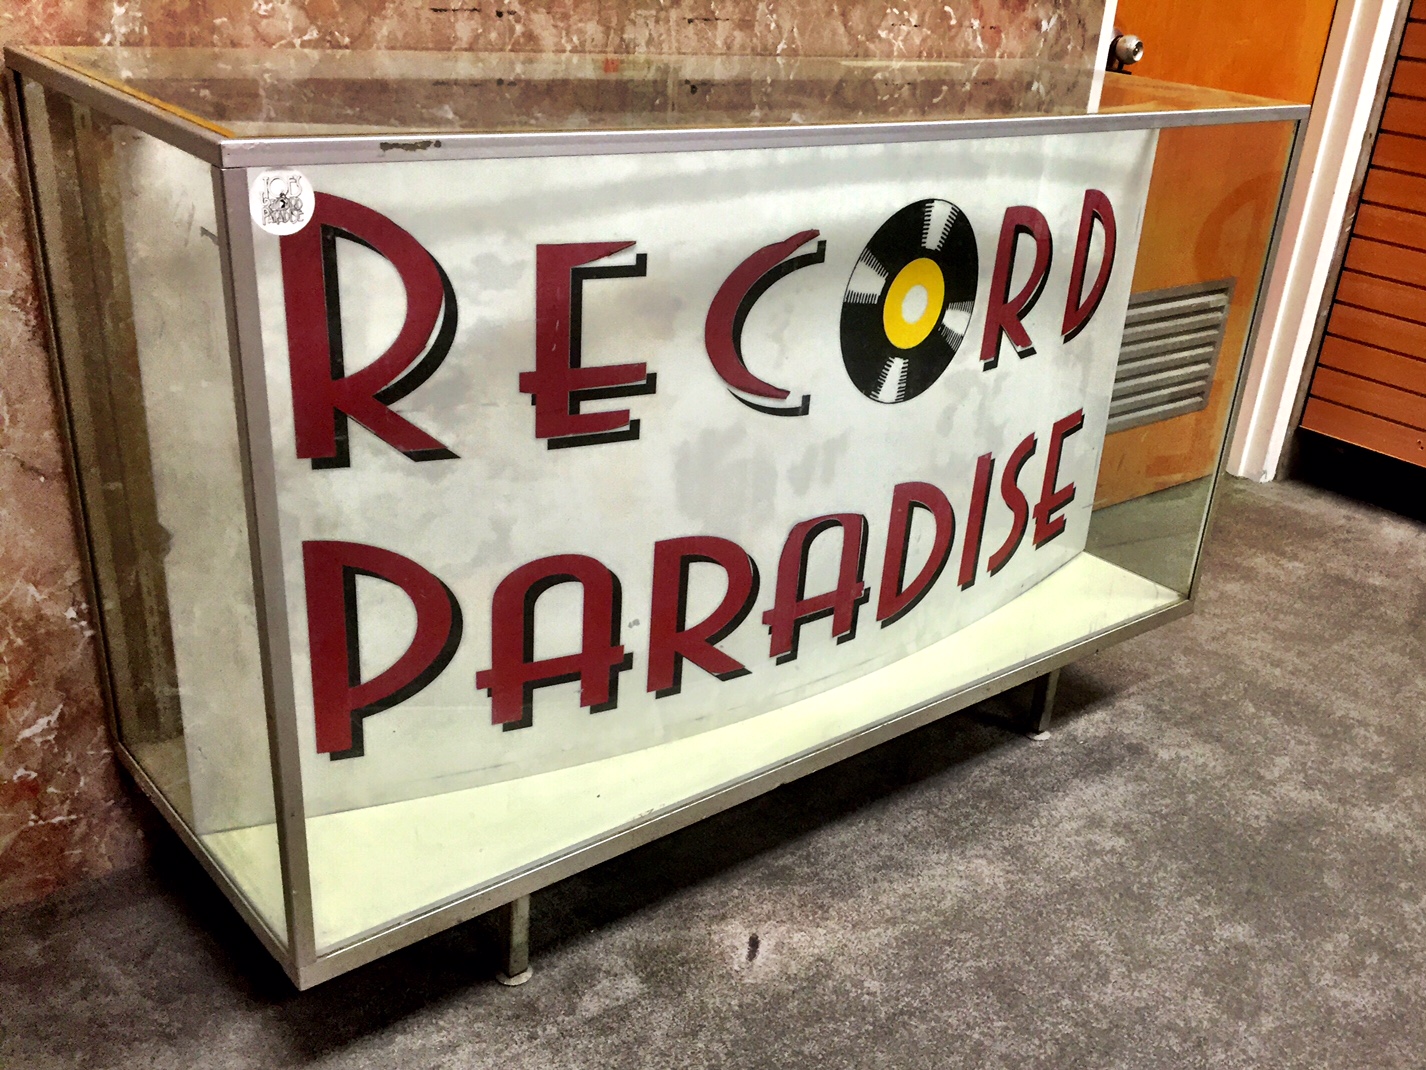 The new Joe's Record Paradise is located in the basement of 8700 Georgia Ave., in Silver Spring, under a SunTrust Bank. (WTOP/Neal Augenstein)